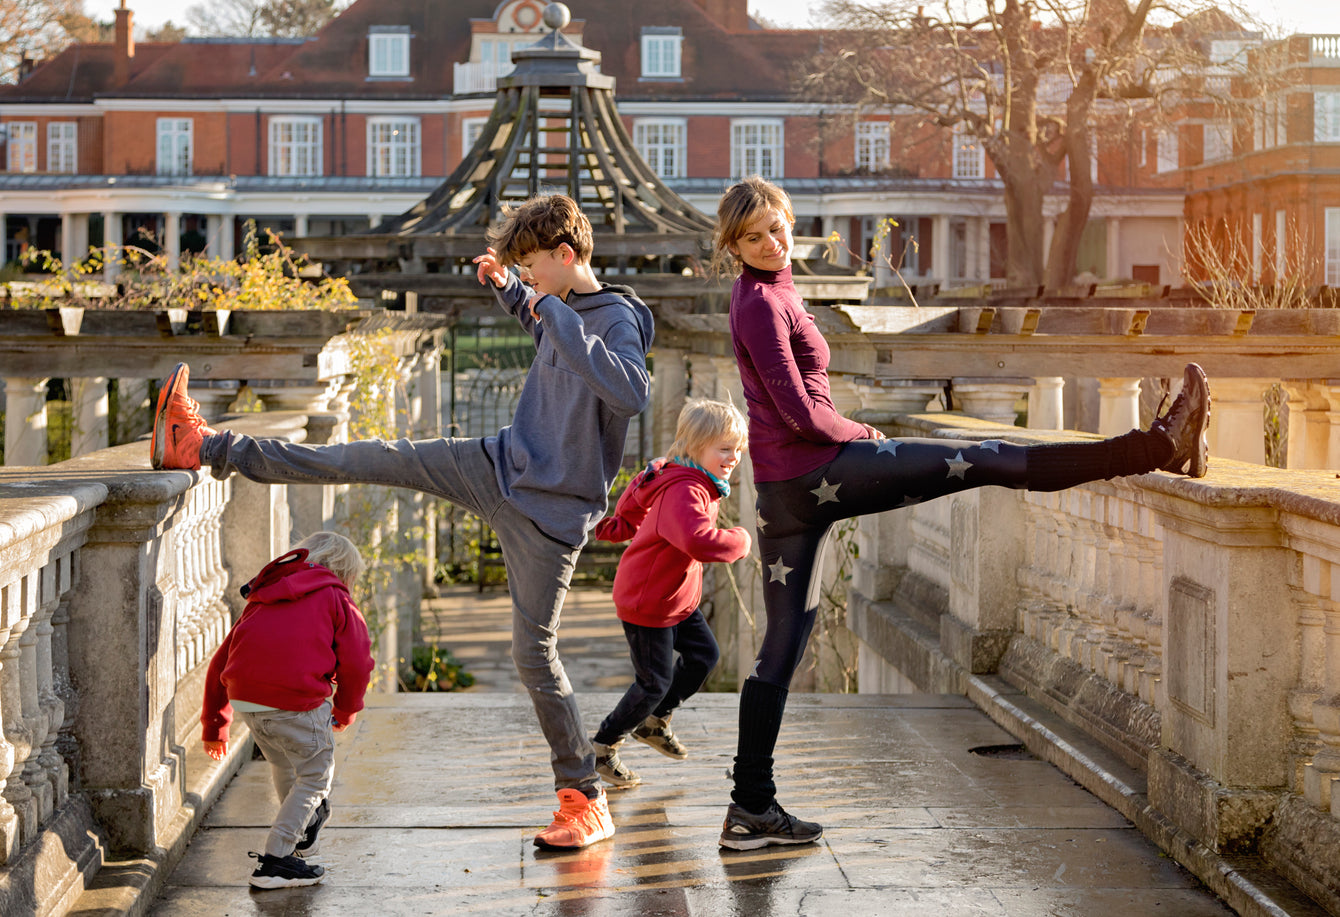 Mum Diary: Keeping Fit and Healthy Through January